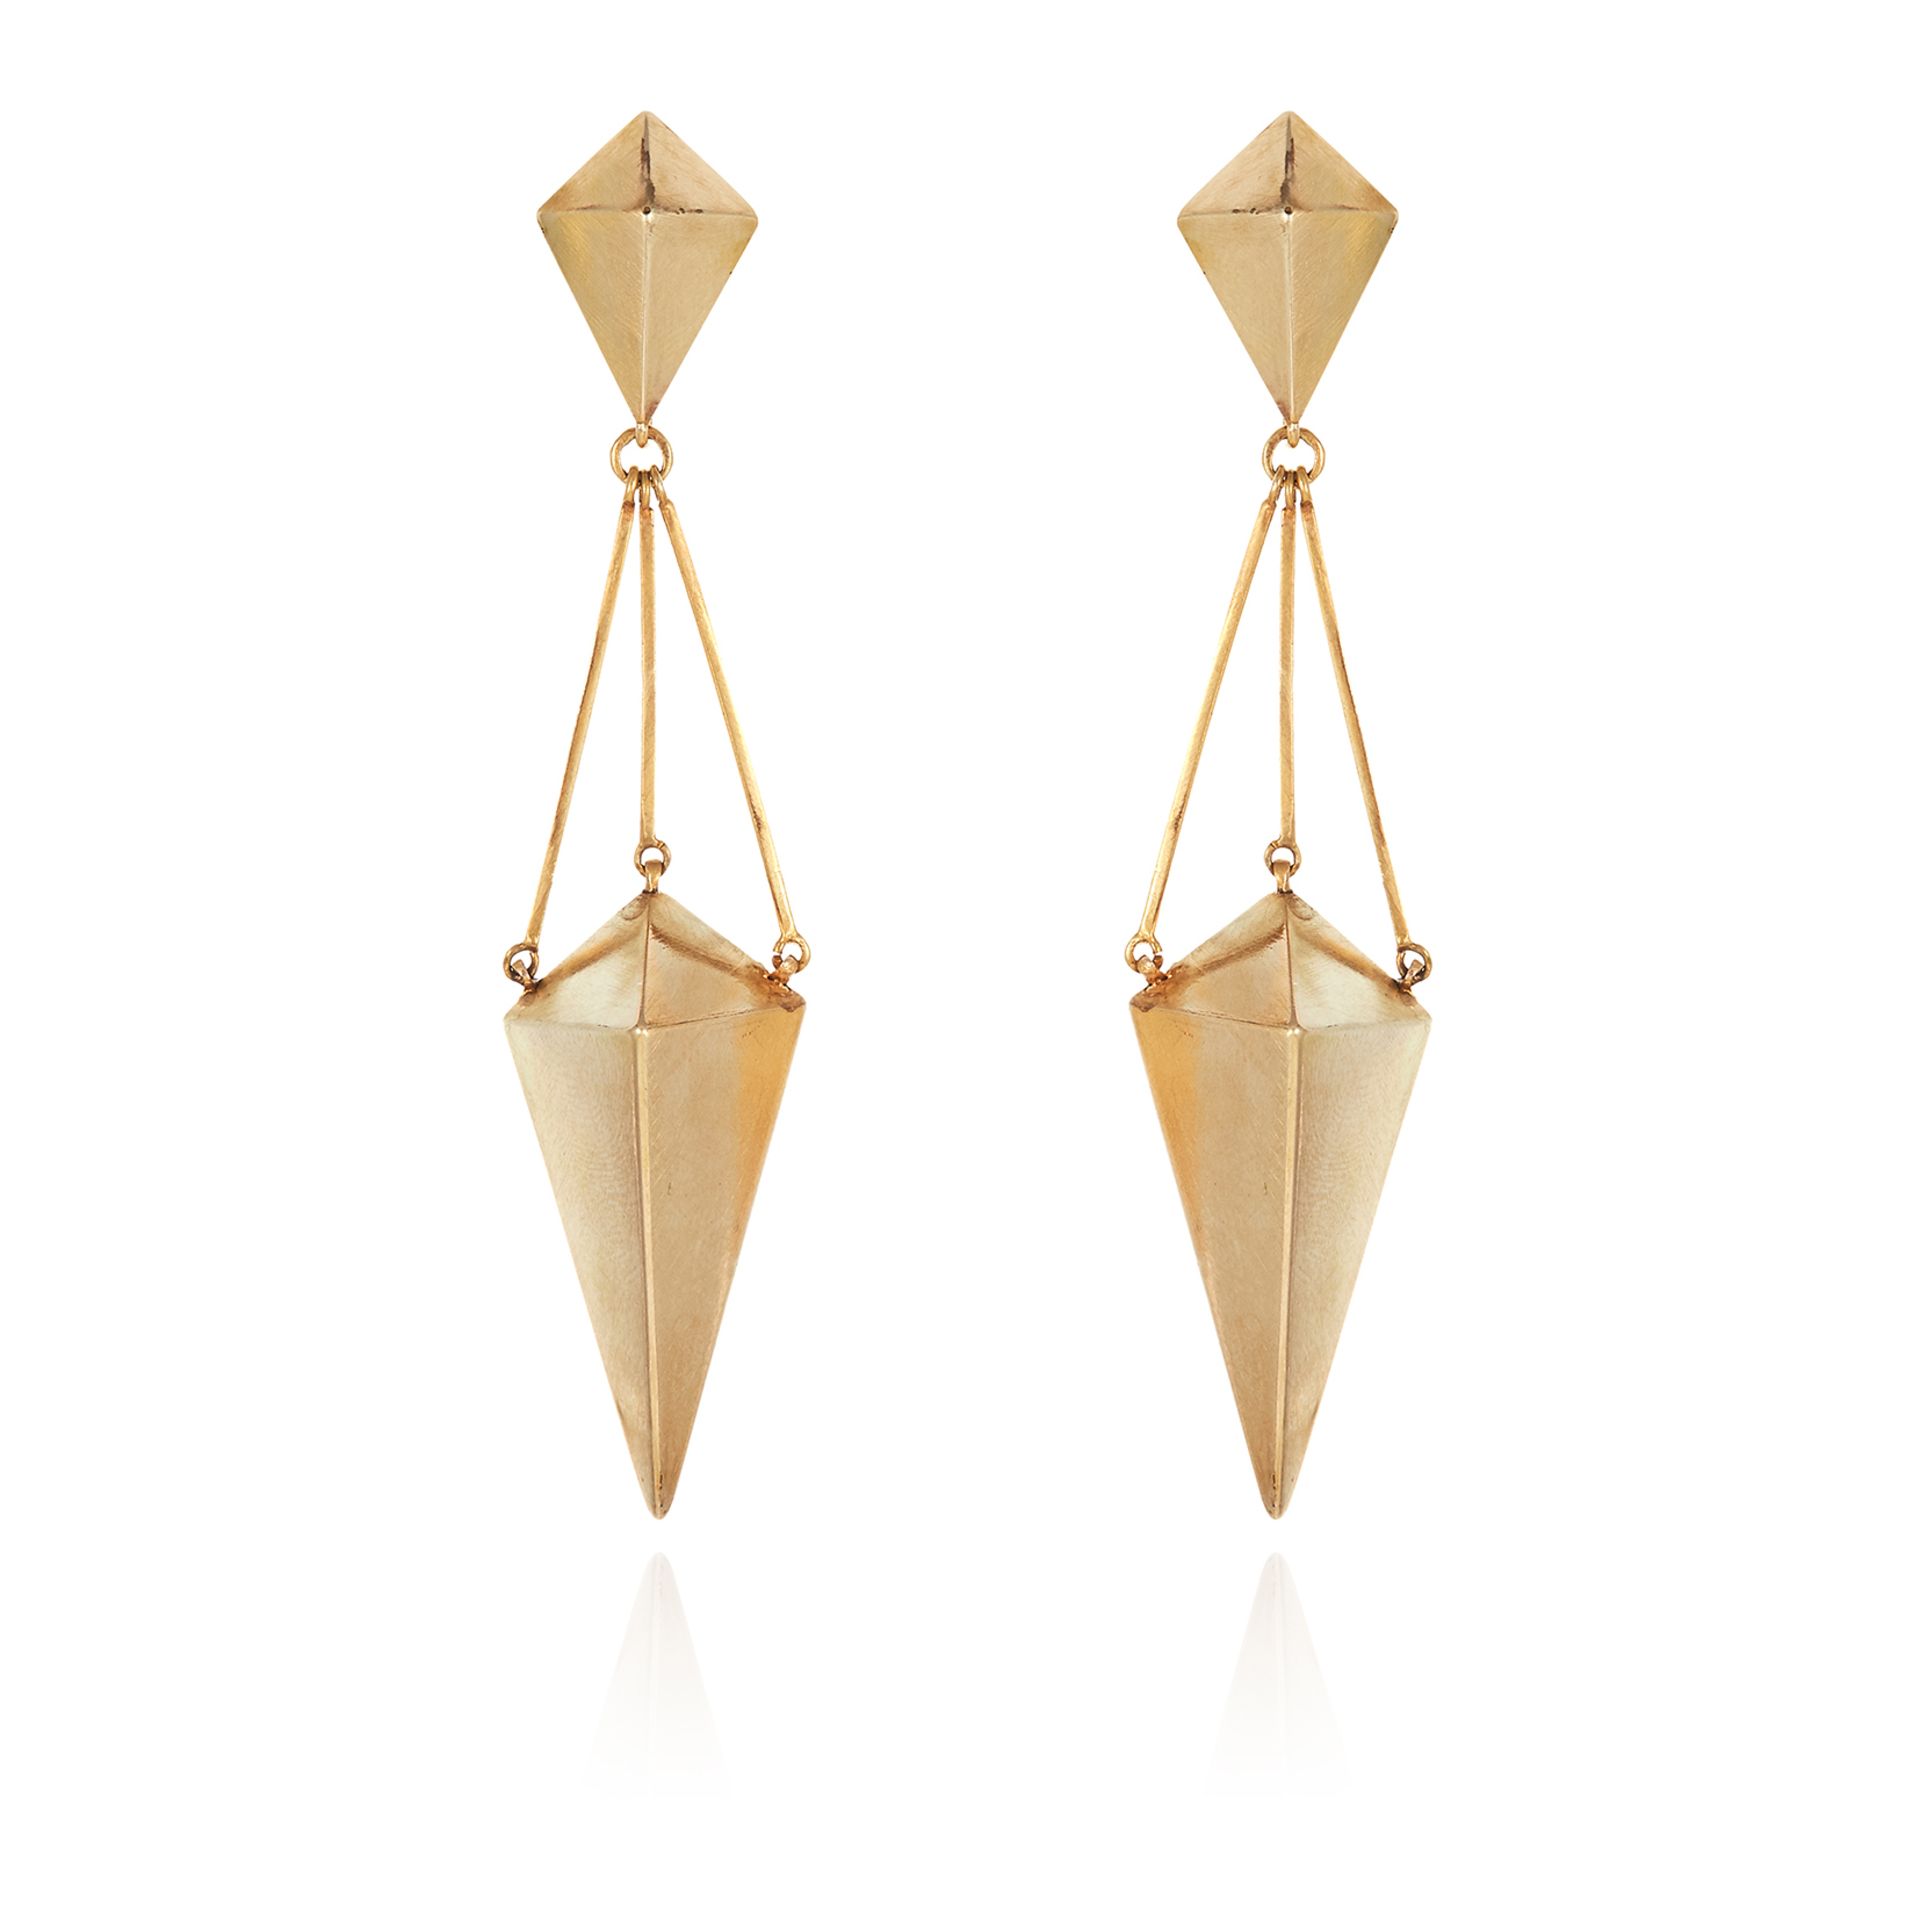 A PAIR OF ANTIQUE DROP EARRINGS in high carat yellow gold, the two diamond motifs joined by a trio